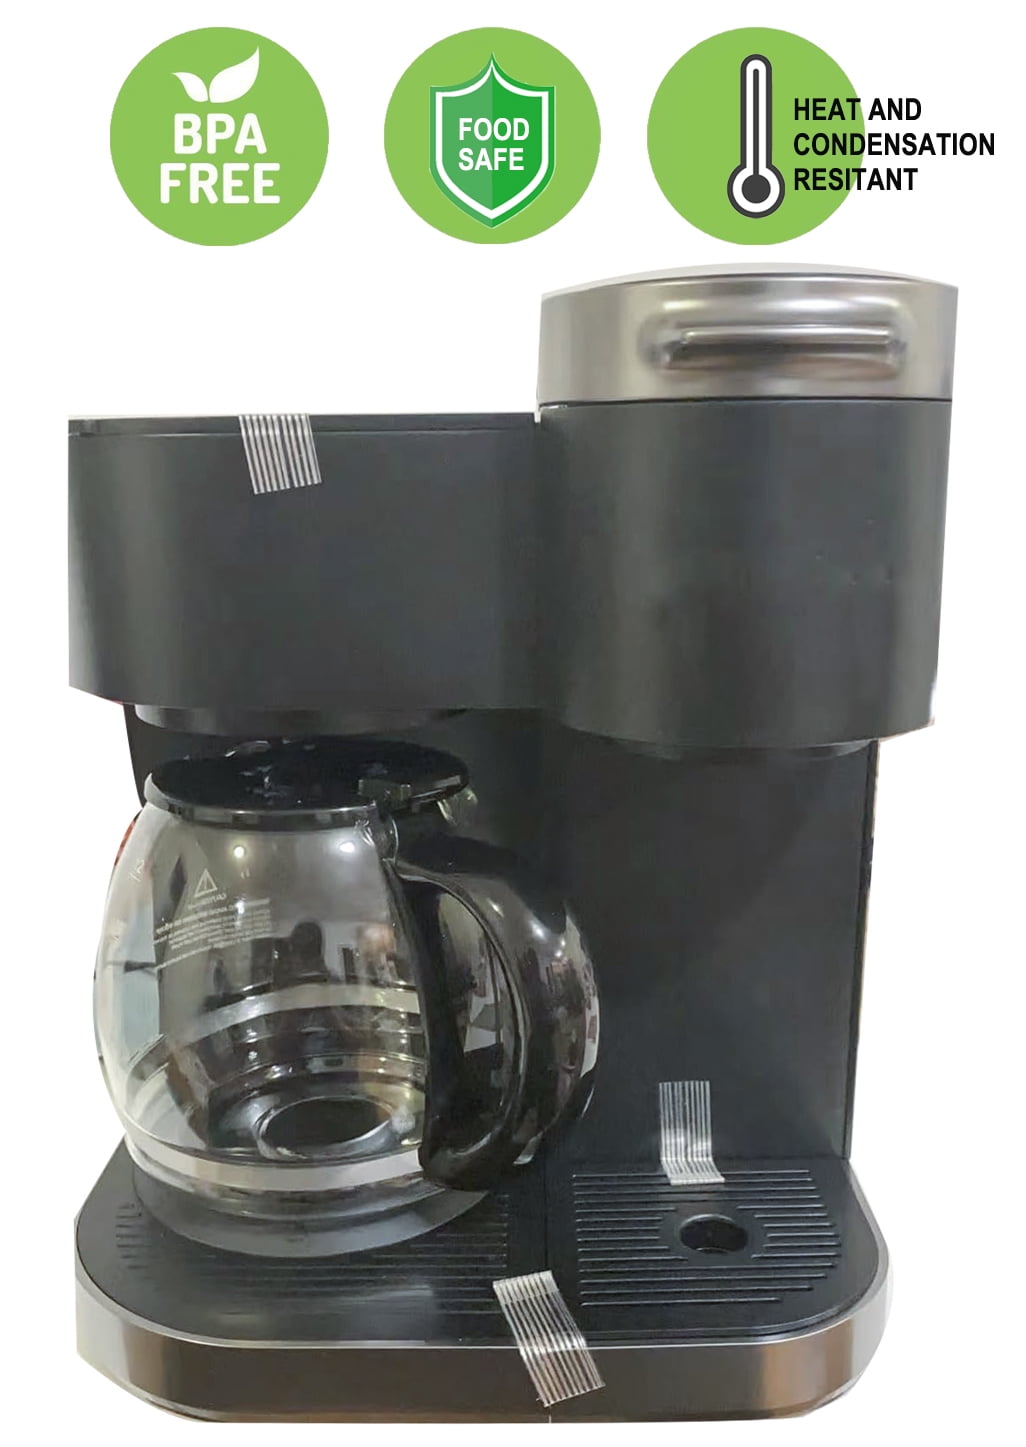  12-CUP Glass Replacement Coffee Carafe ONLY for KEURIG K-DUO  Single Server & Carafe Coffee Maker